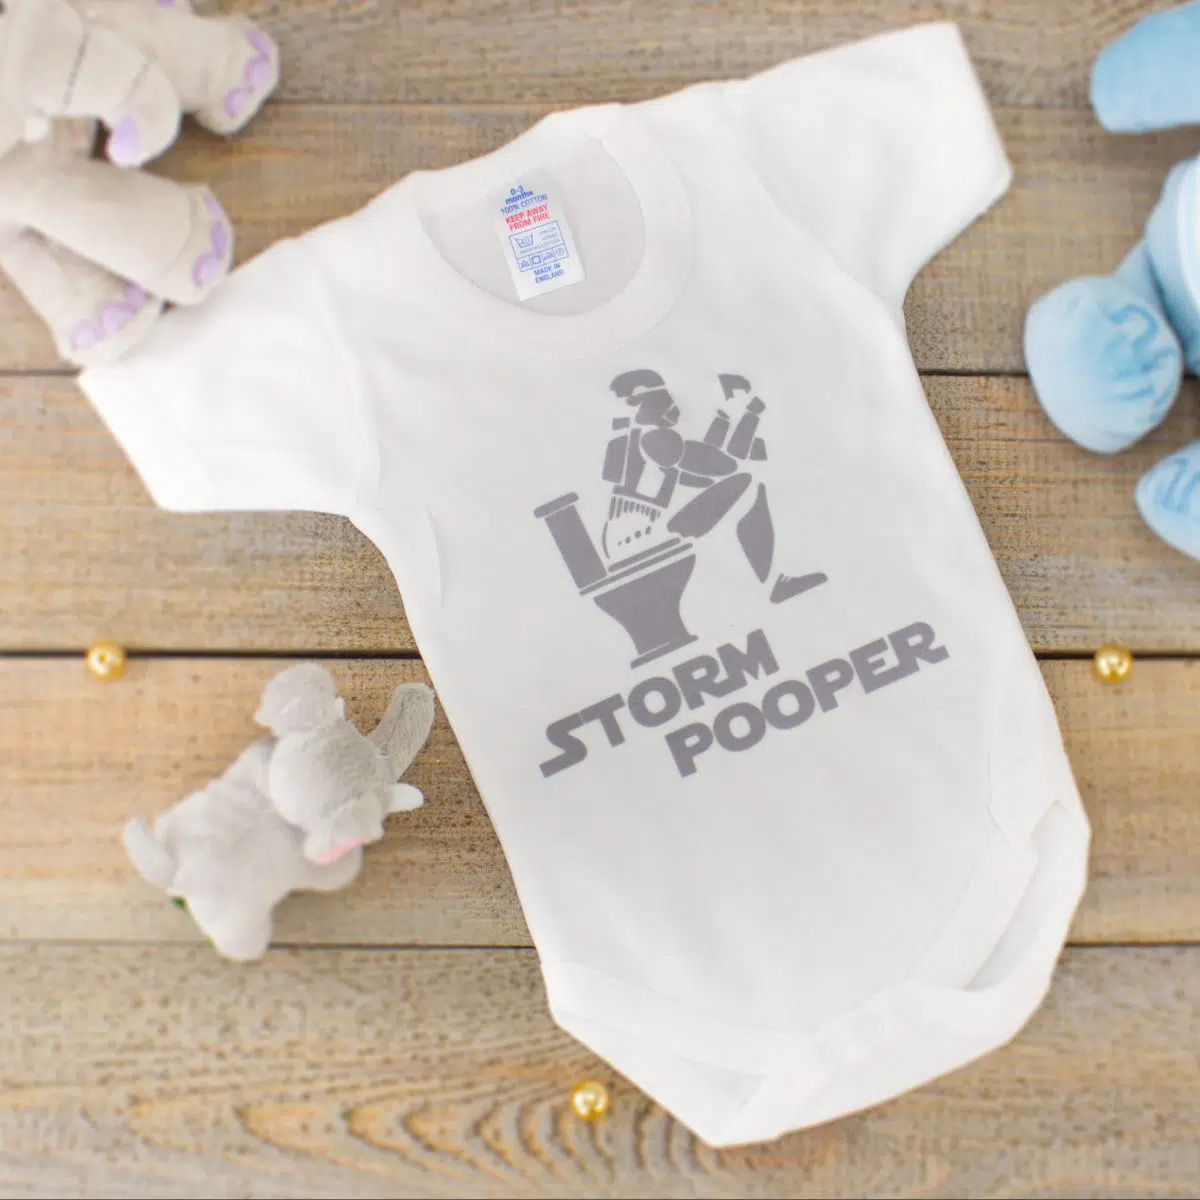 star wars baby clothes - storm pooper